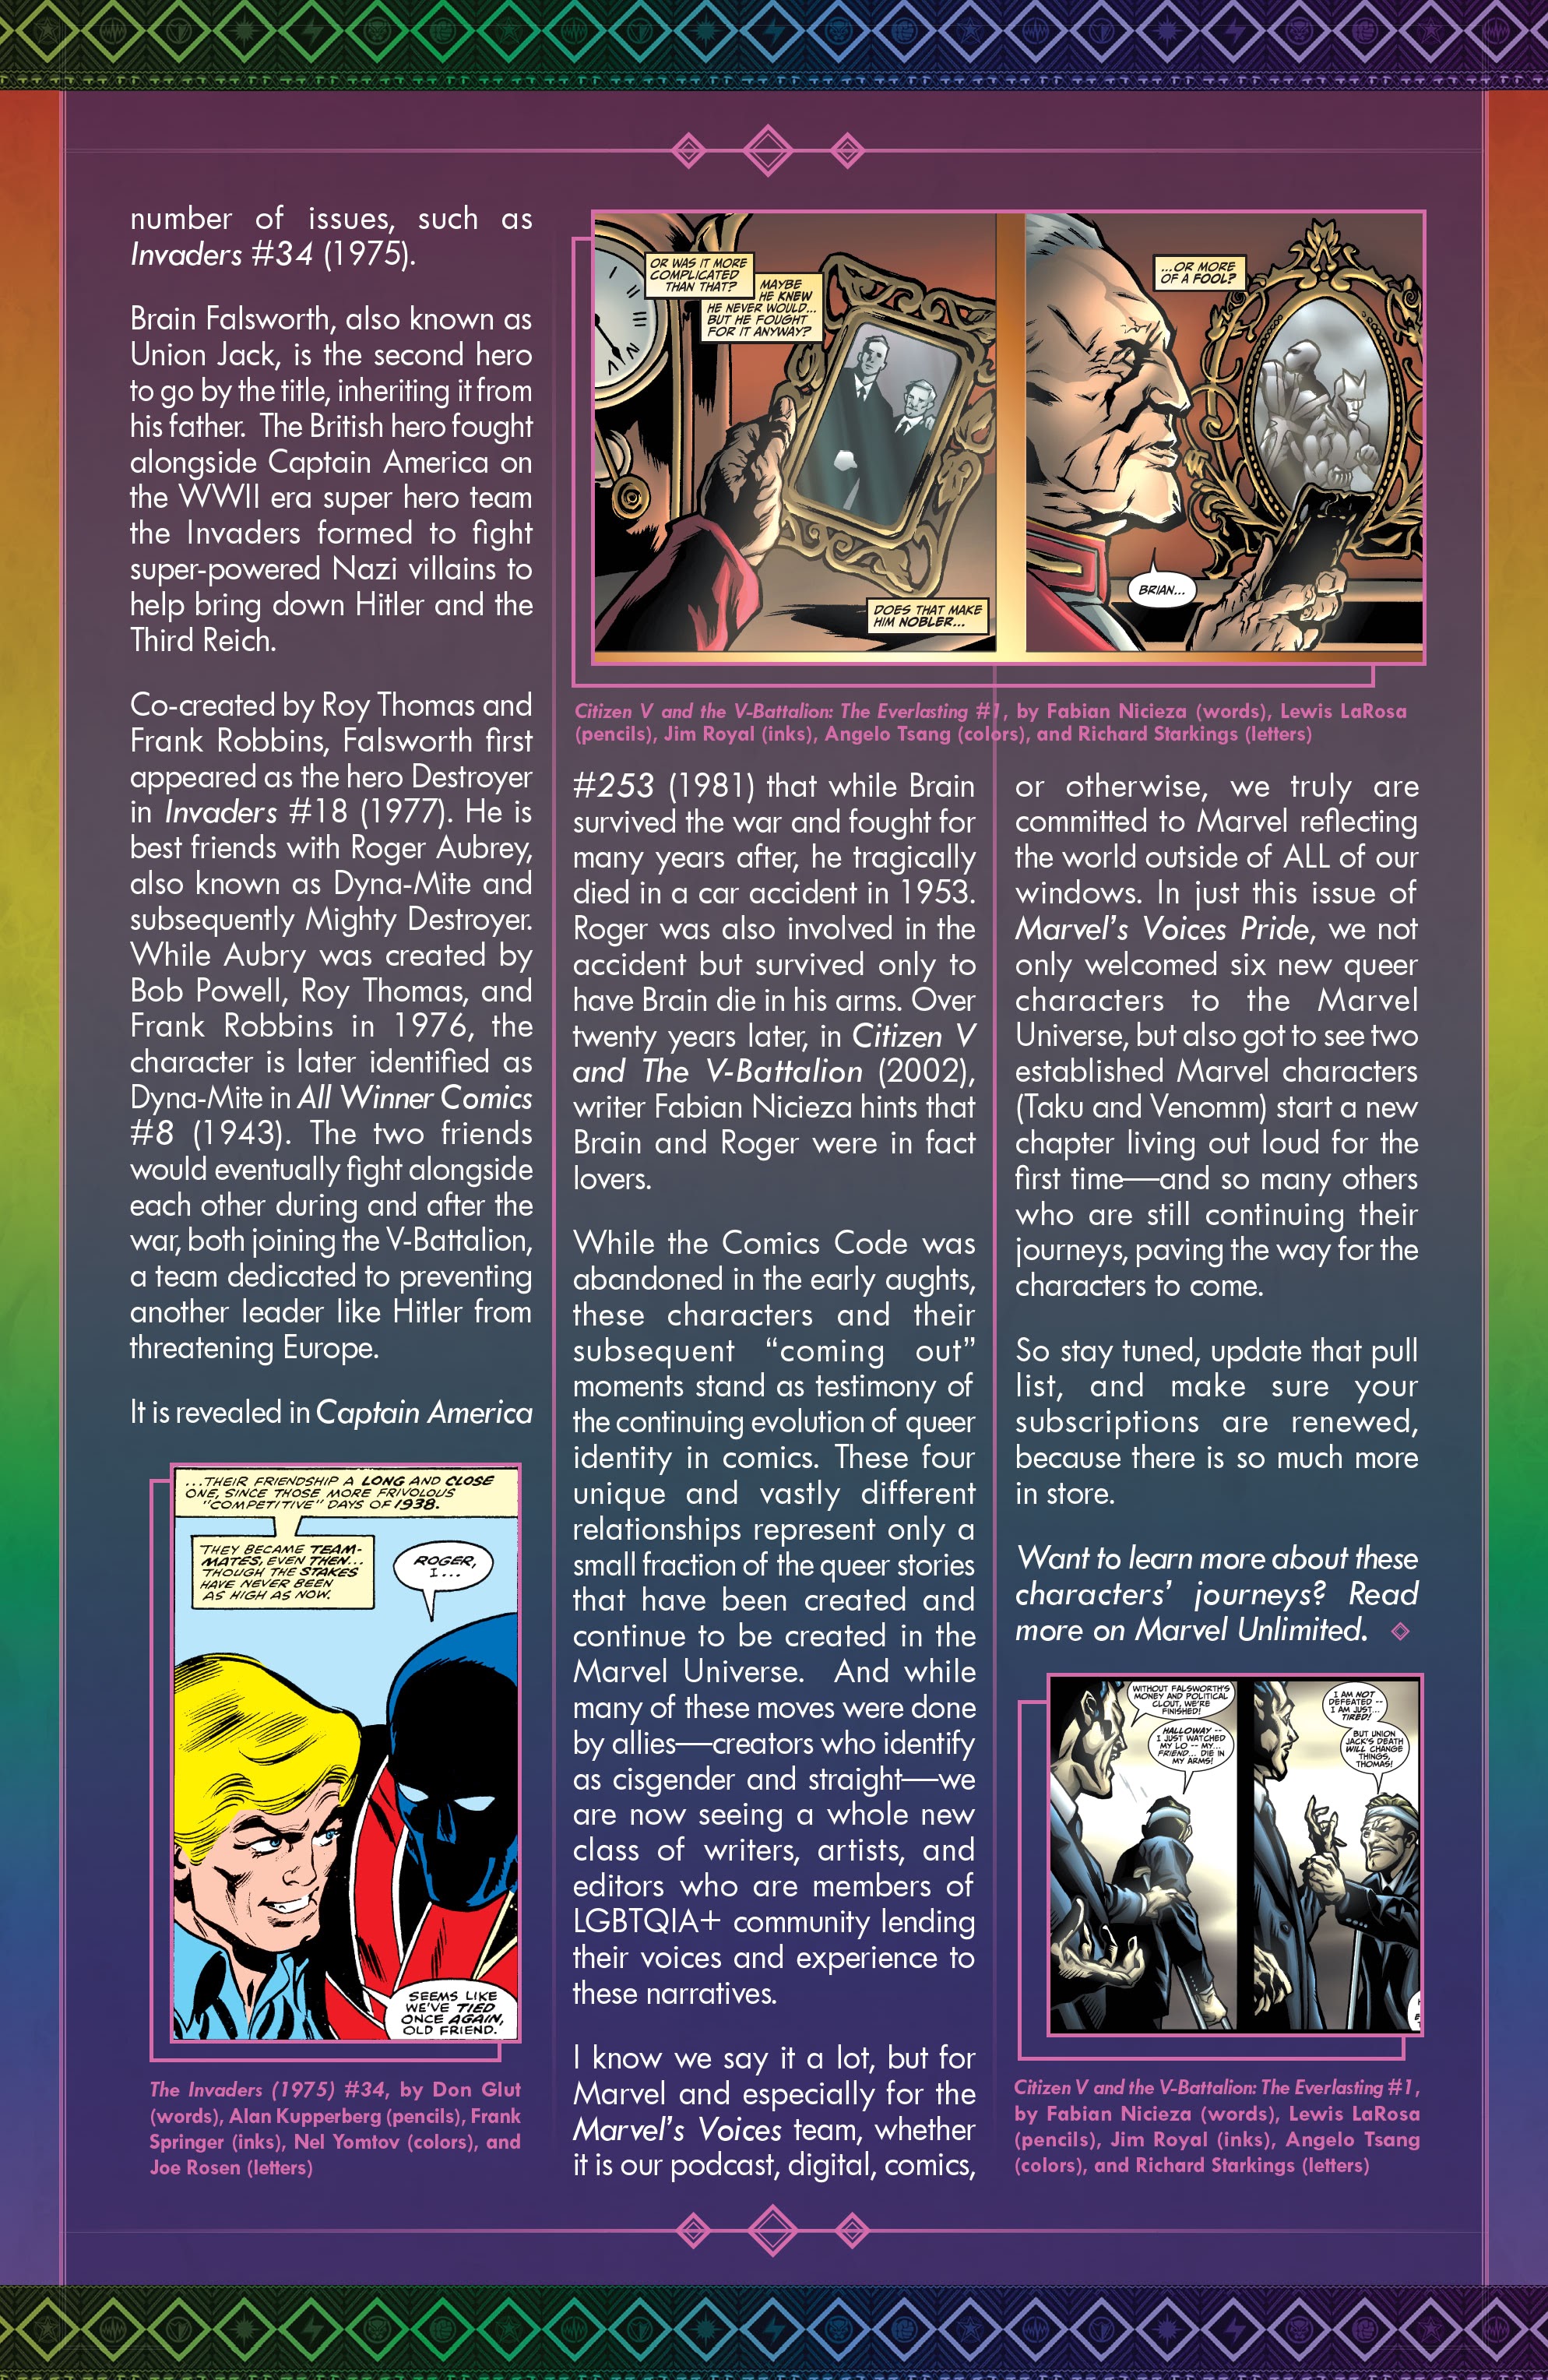 Read online Marvel's Voices: Pride (2022) comic -  Issue # Full - 27